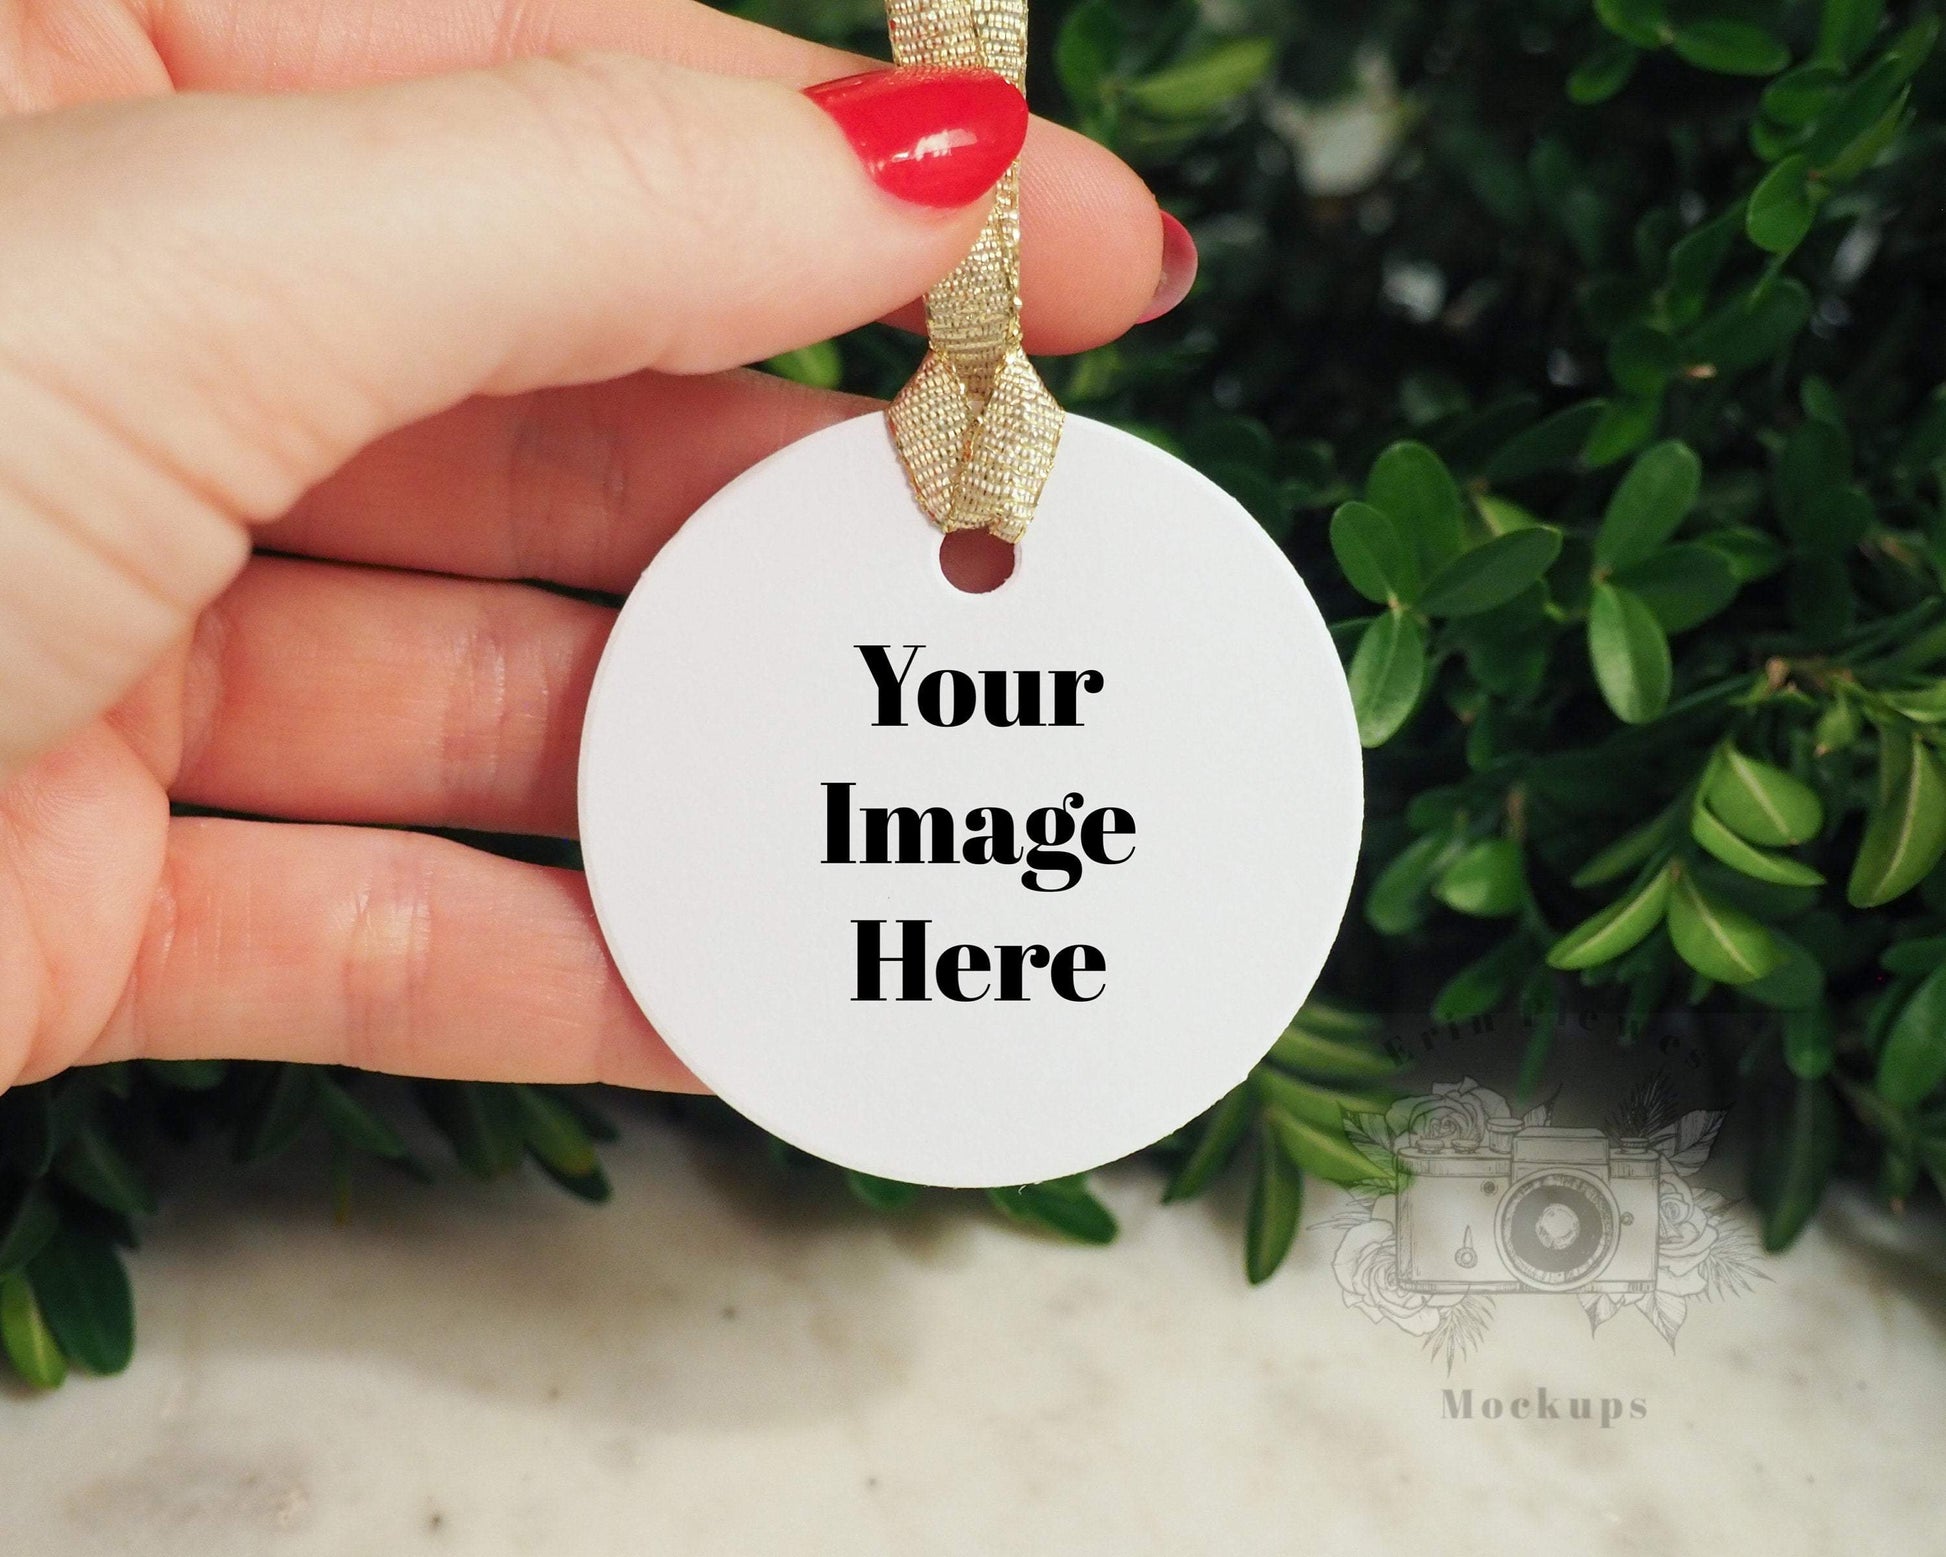 Erin Plewes Mockups Round label mockup, Round gift tag mock-up for wedding favor with hand lifestyle photo, JPG instant Digital Download template